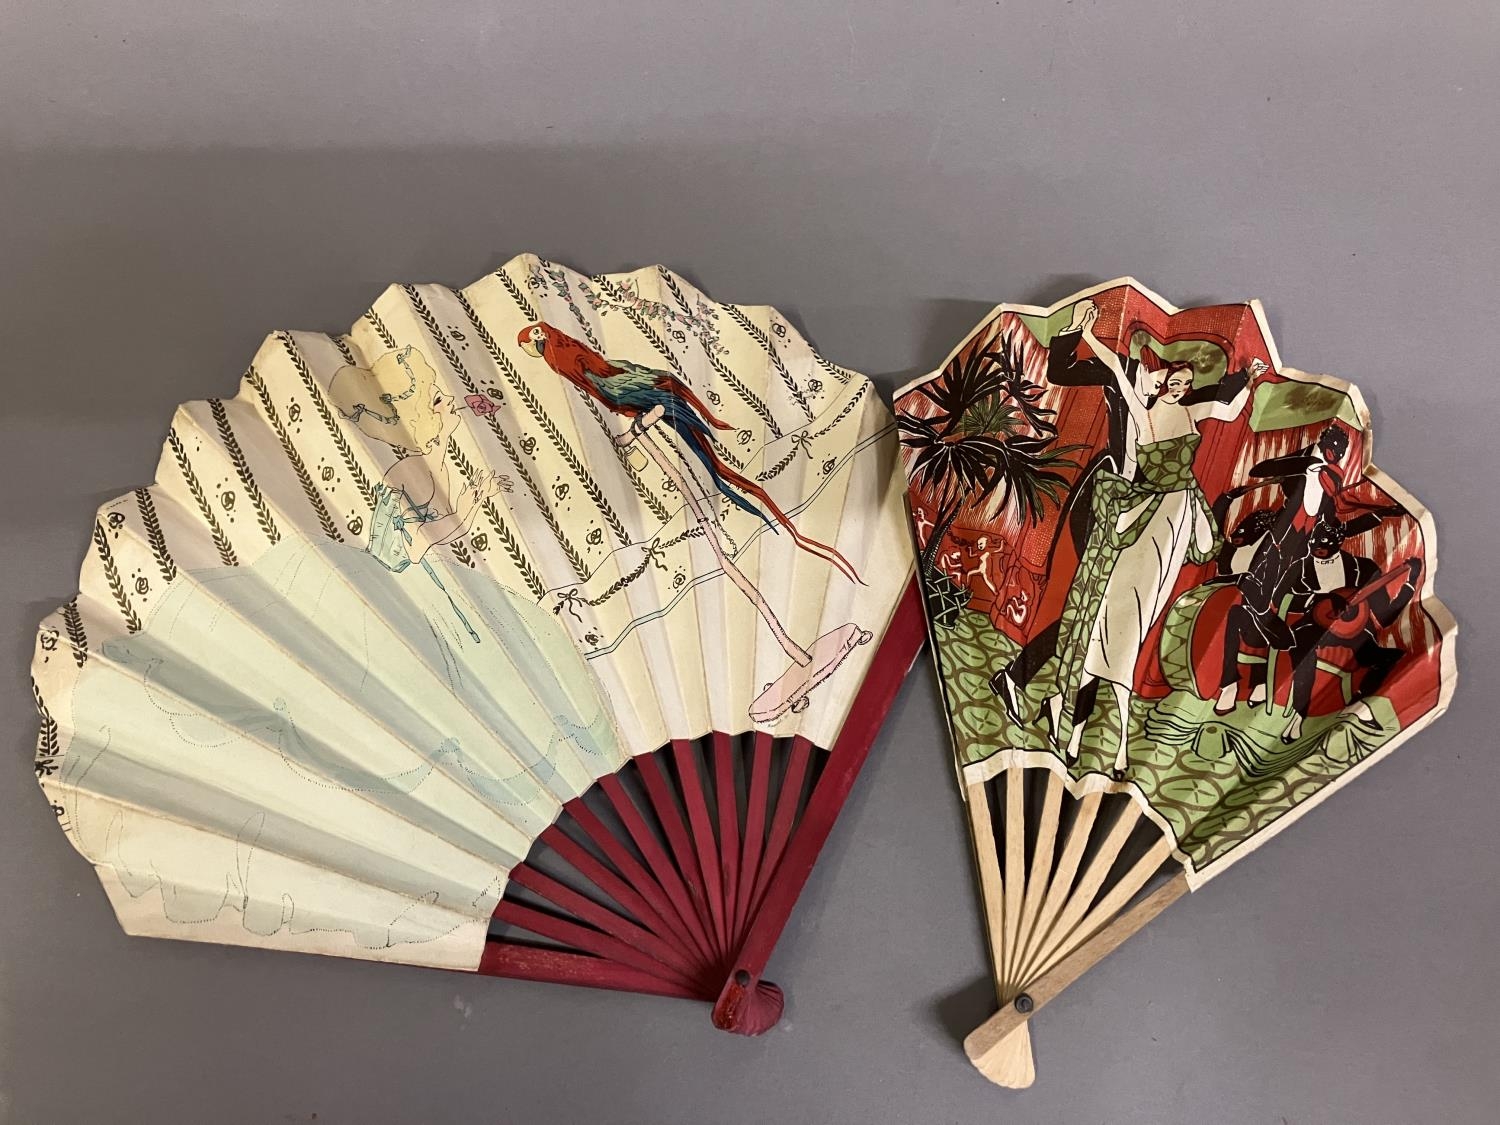 Advertising fans: The Savoy Hotel, printed by Maquet, a good paper fan with double leaf, sticks dyed - Image 2 of 5